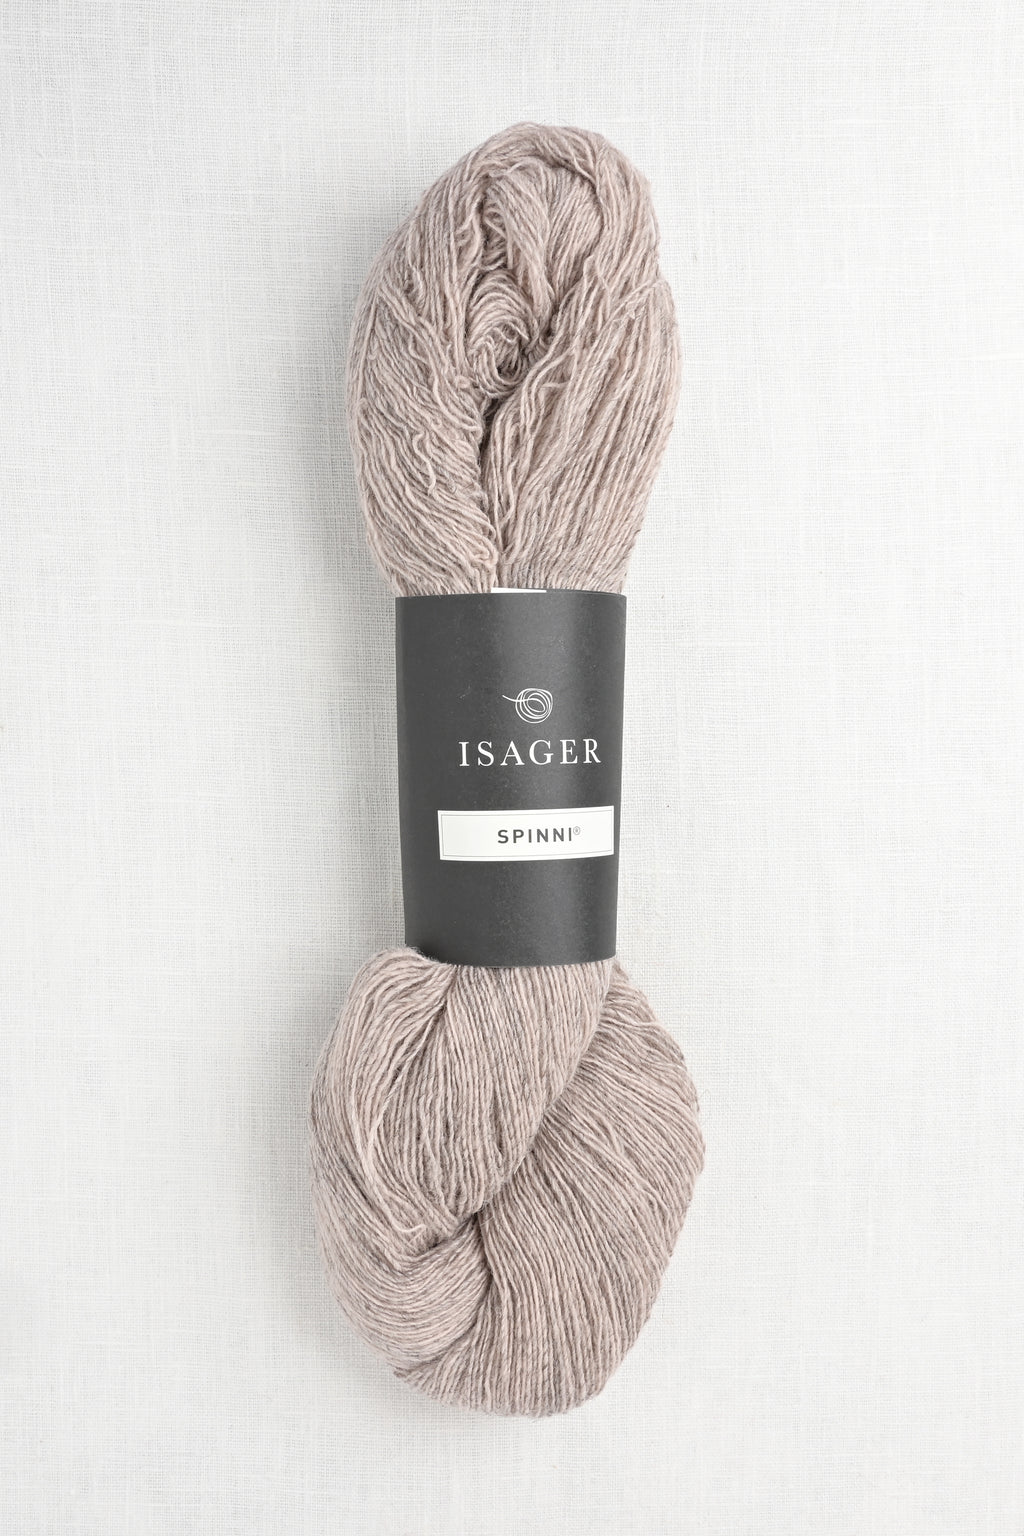 isager spinni 61s pink heather 100g